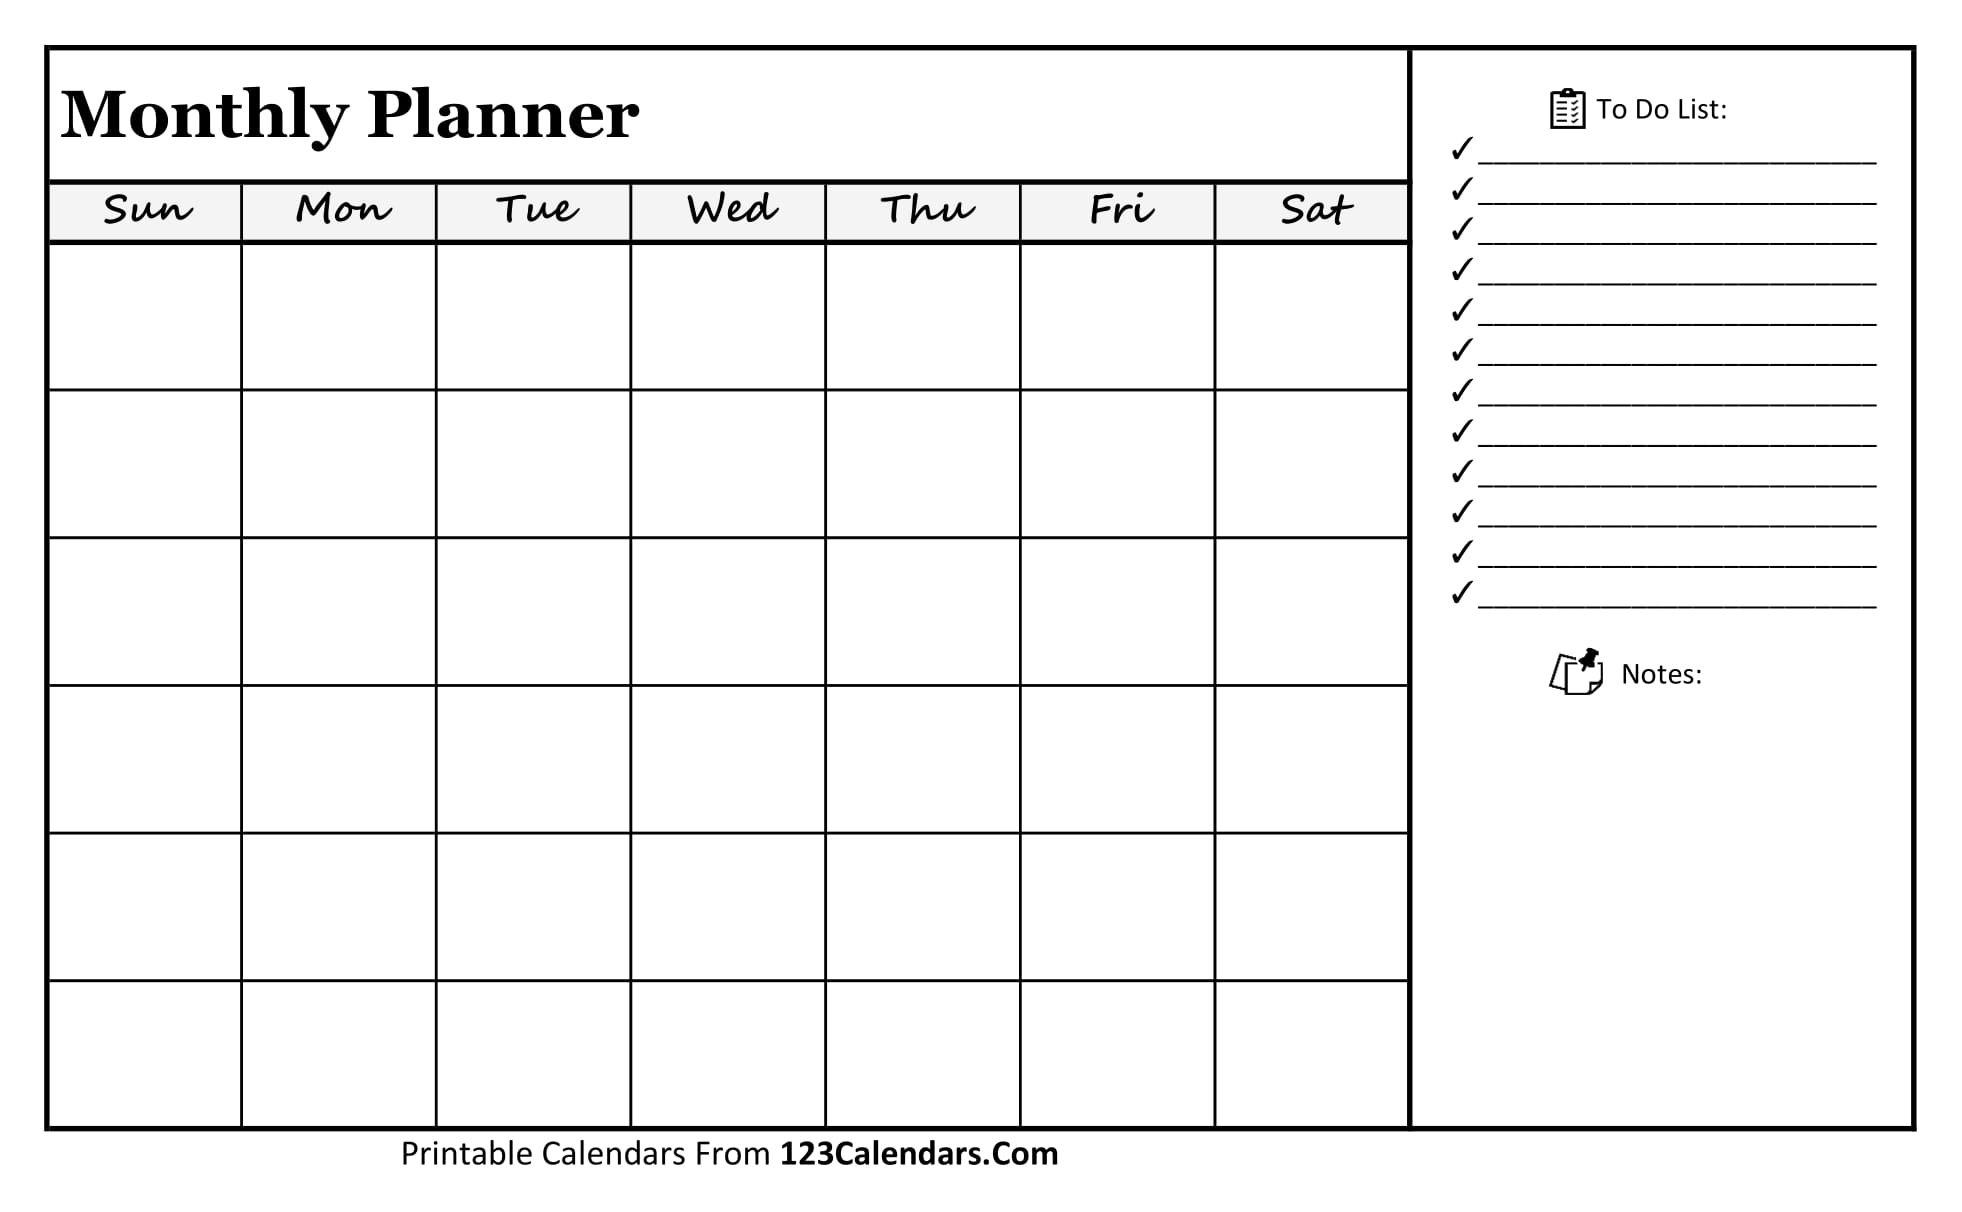 10 Awesome Printable Monthly Planner To Do List